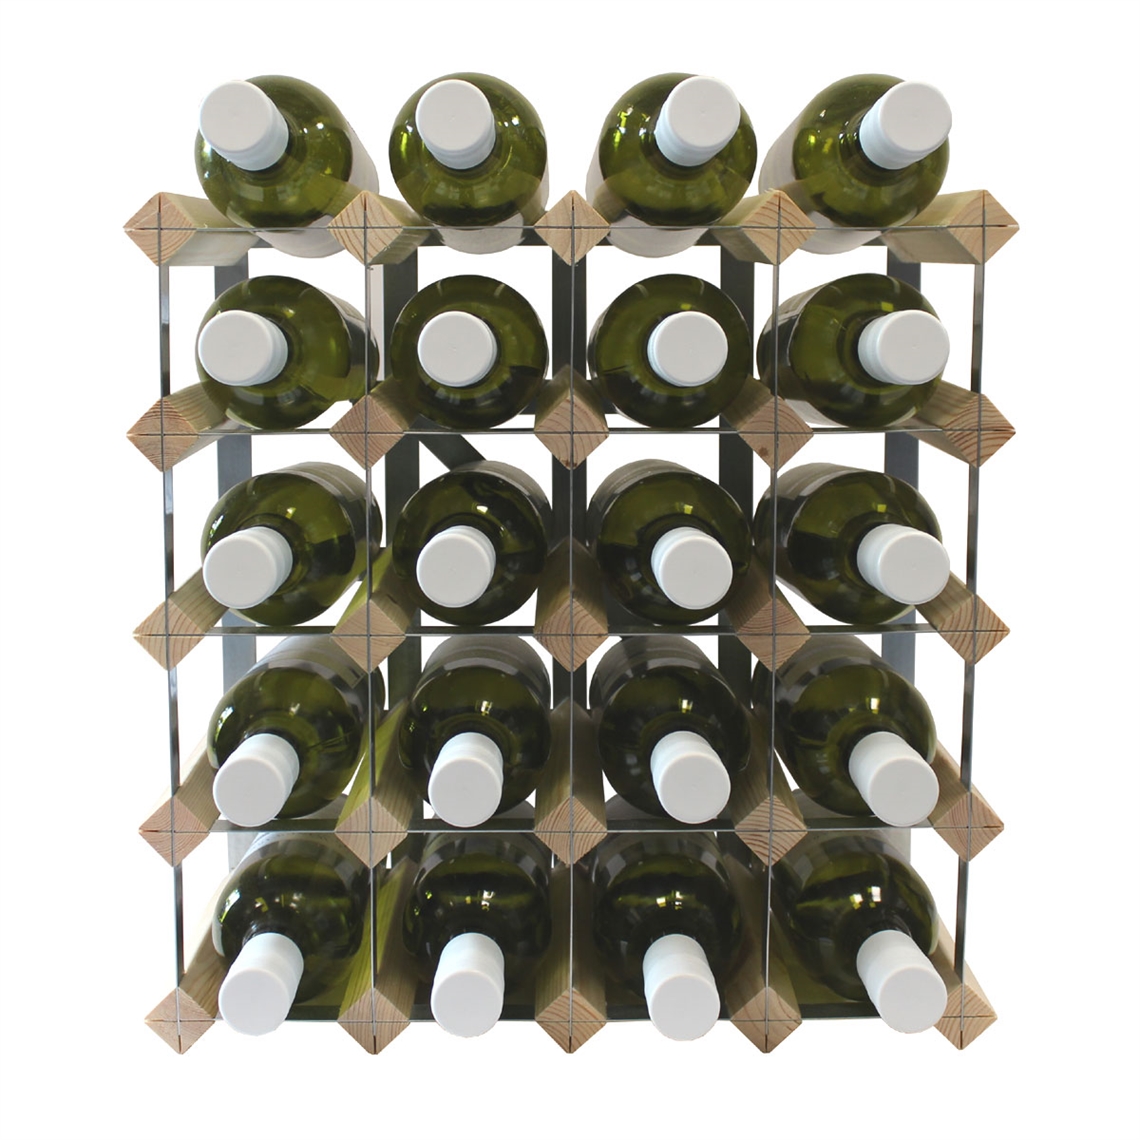 View more wine rack accessories from our Assembled Wine Racks range